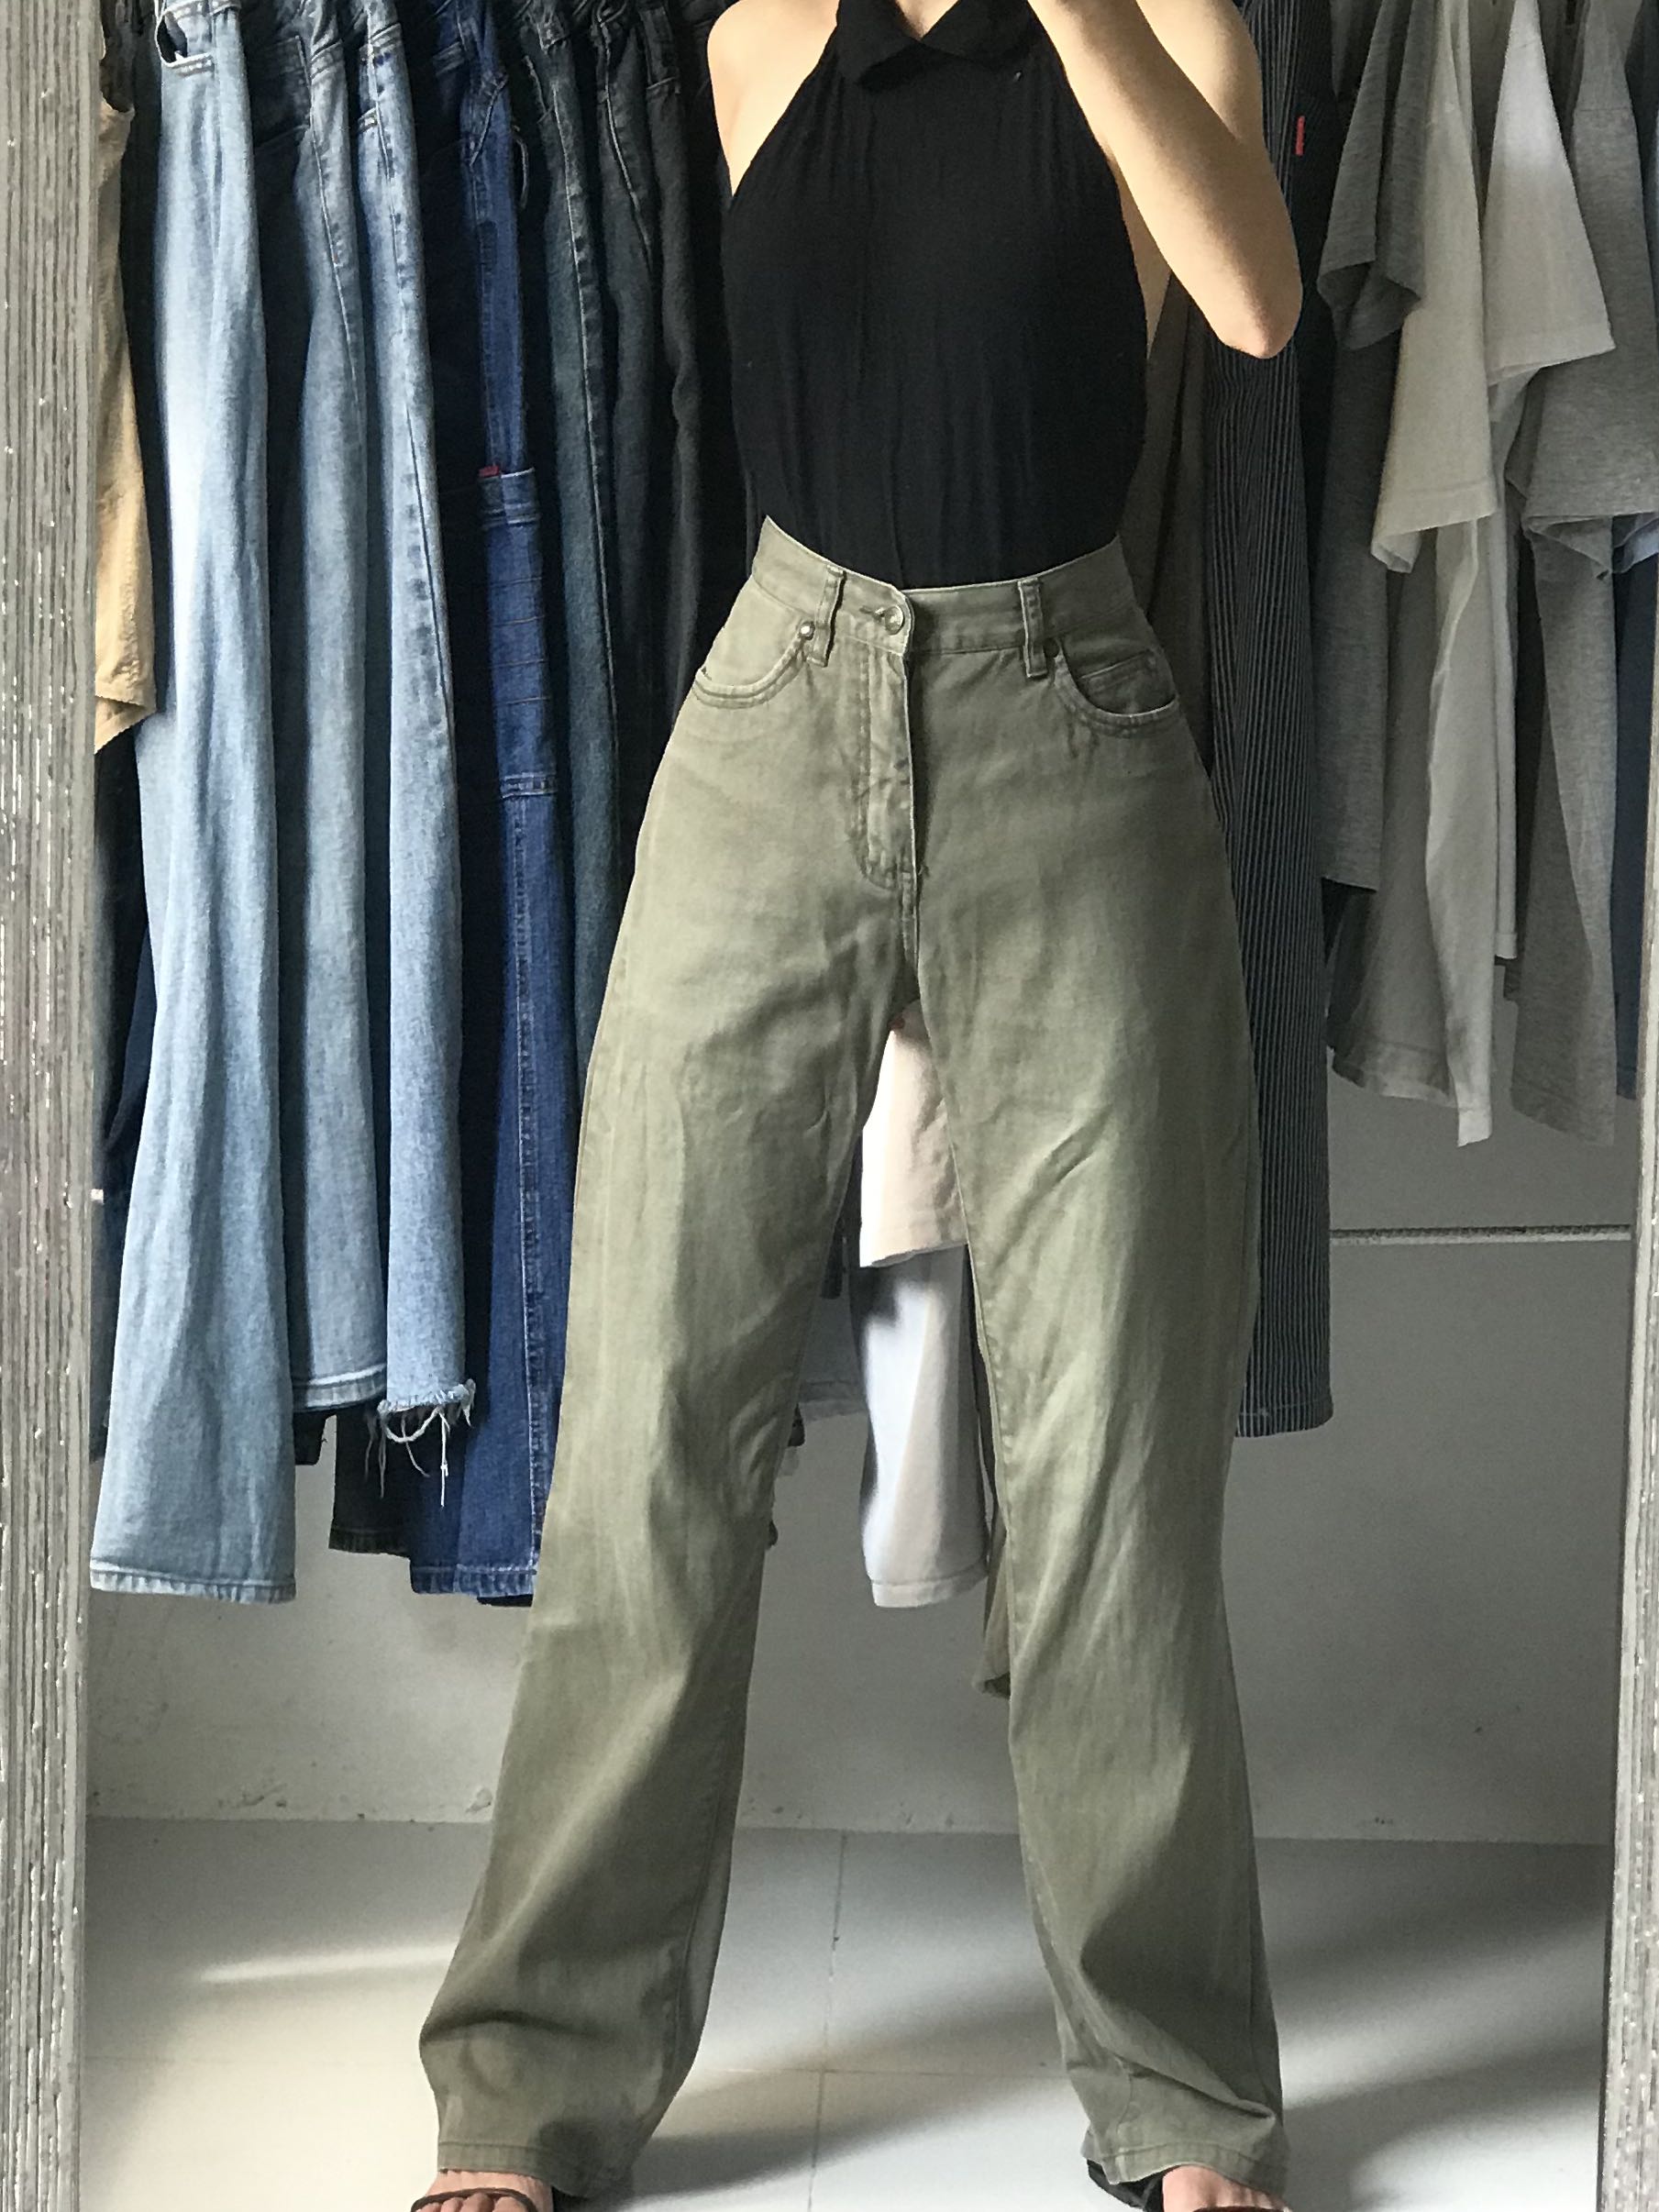 Army Green Cargo Pants Baggy Jeans Women Fashion Streetwear Pockets  Straight High Waist Casual Vintage Denim Trousers Overalls | Green cargo  pants, Cargo pants baggy, Cargo pants outfit